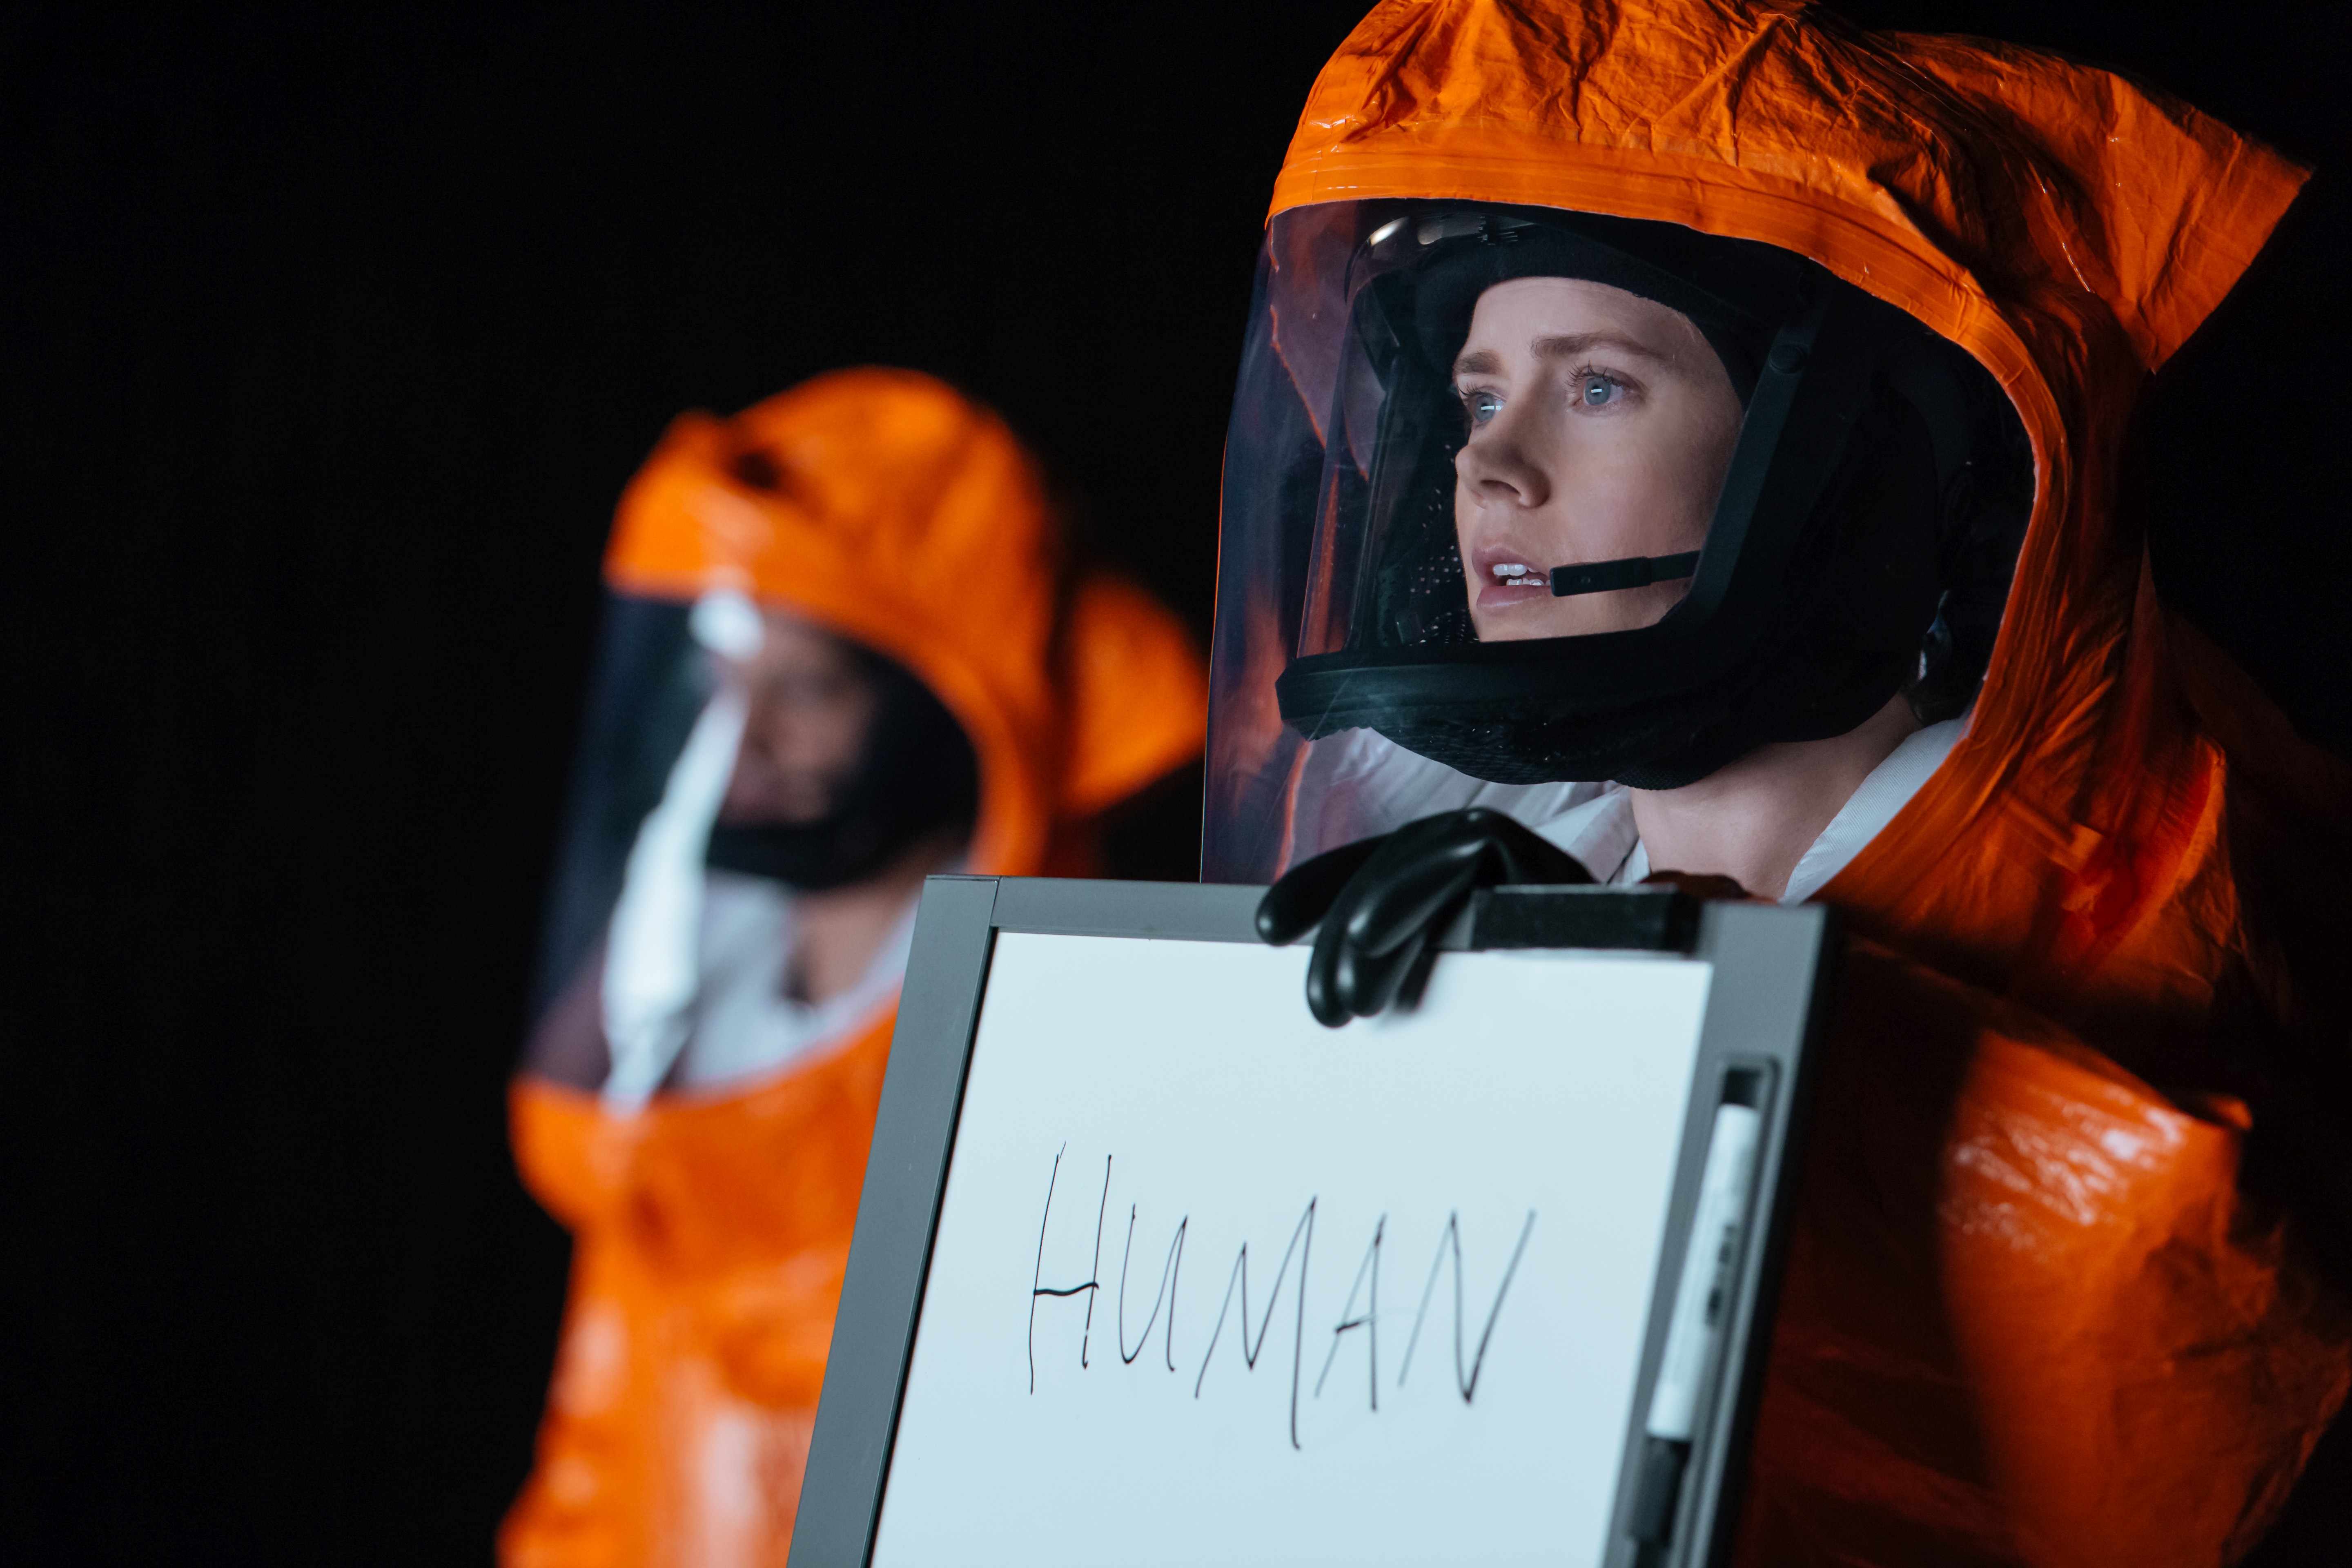 Movie Arrival HD Wallpaper | Background Image